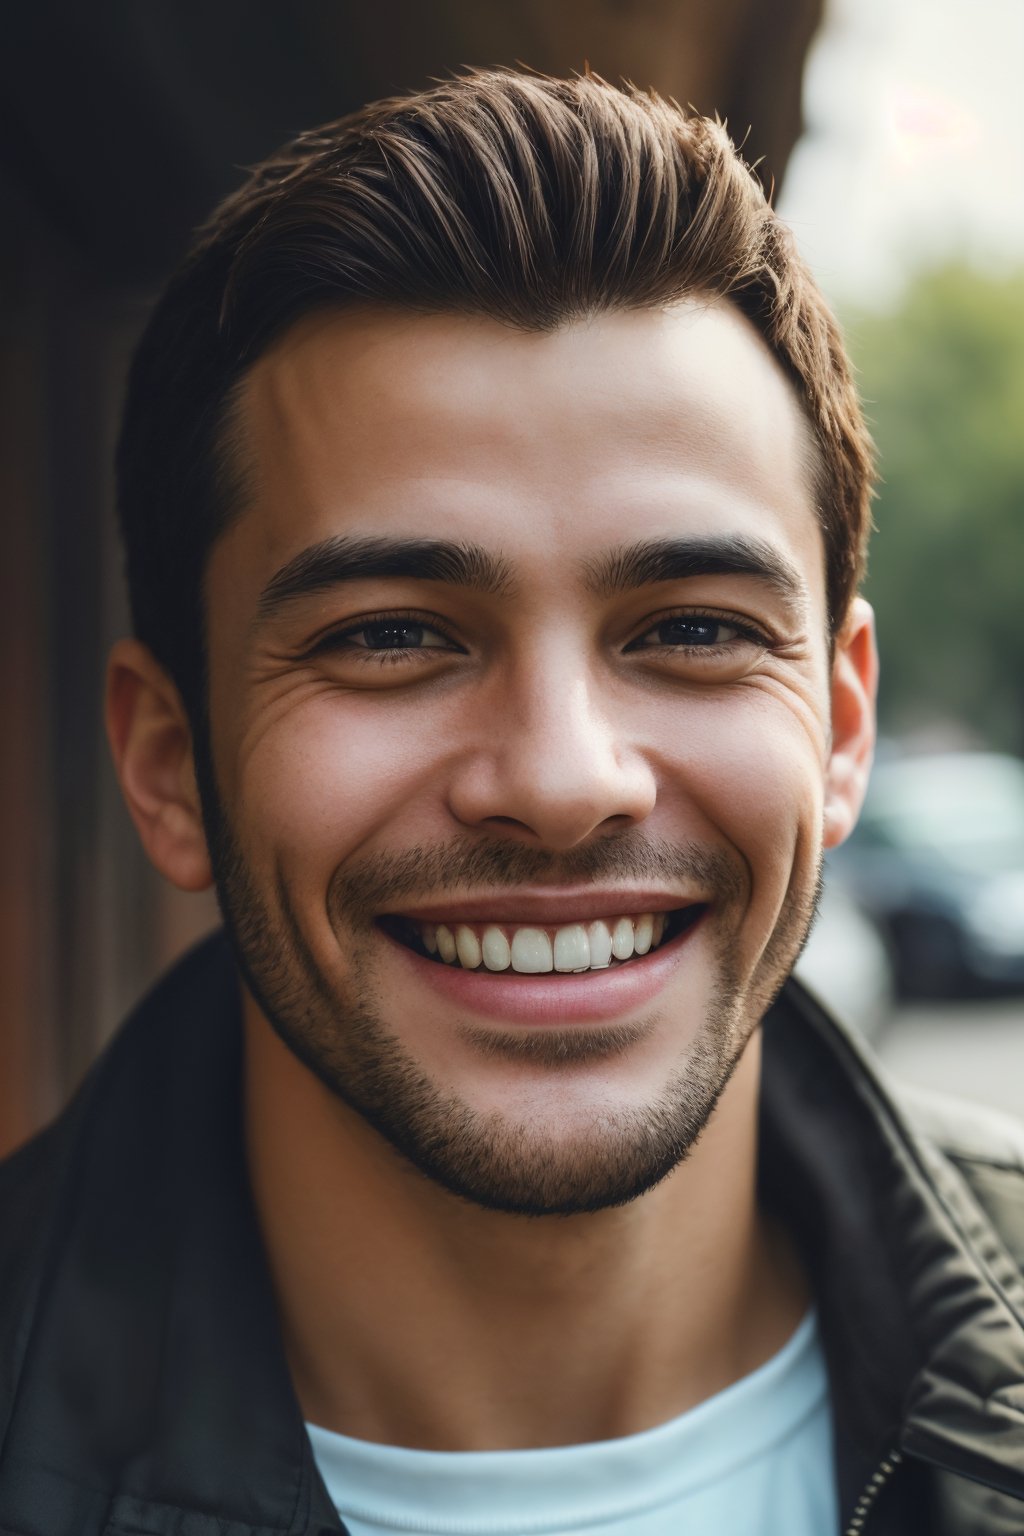 A (striking, compelling) photo-realistic close-up portrait of a man radiating joy with his heartfelt smile. The outdoor environment adds a touch of (natural, cinematic) beauty to the composition. This high-resolution masterpiece captures the warmth and sincerity in the man's expression.